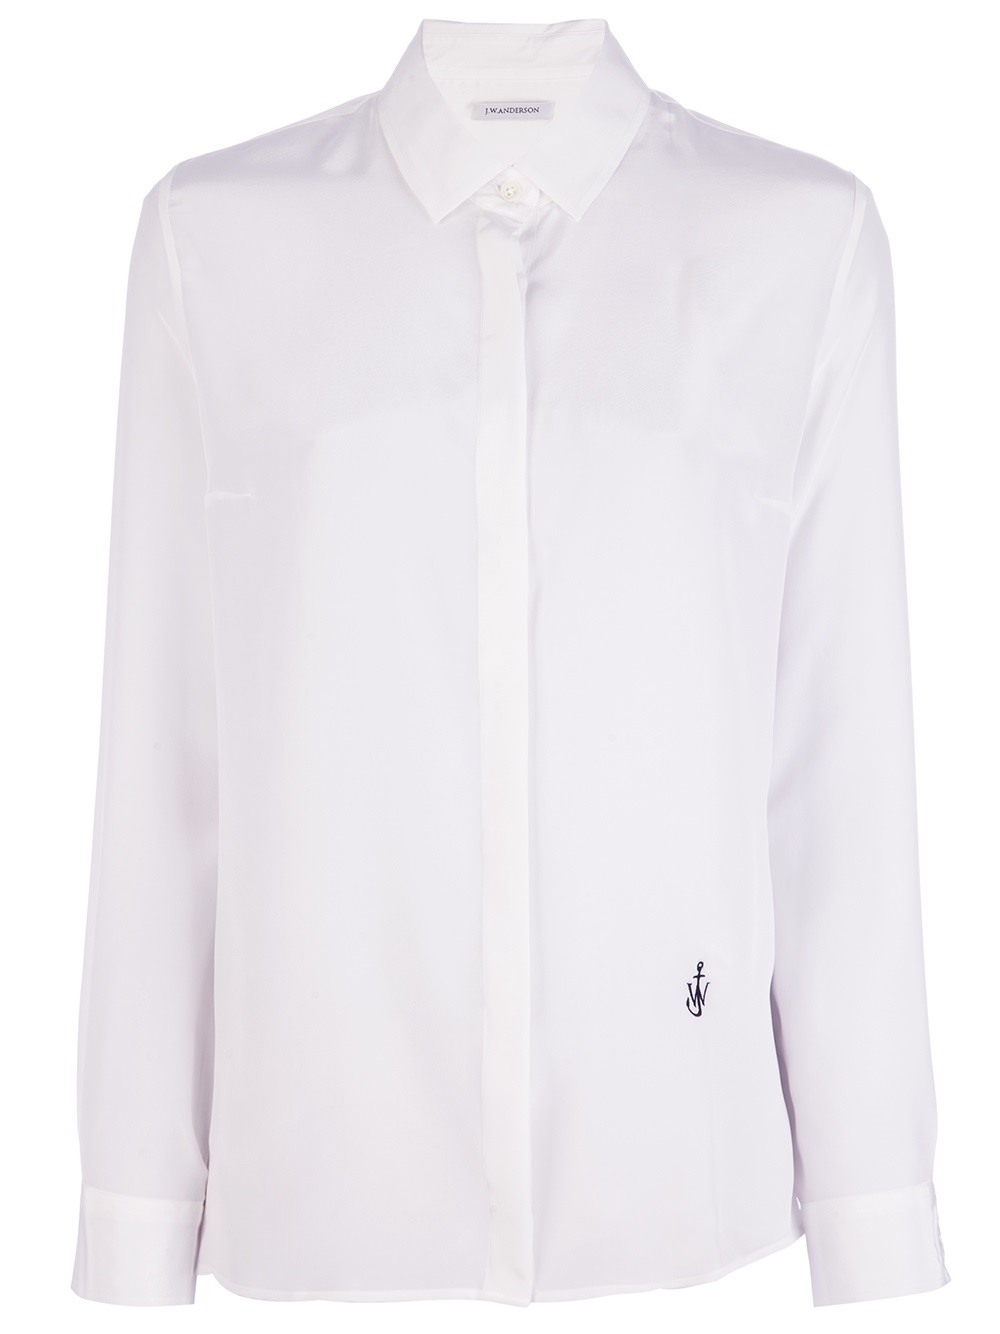 Lyst - J.w.anderson White Shirt with Logo in White